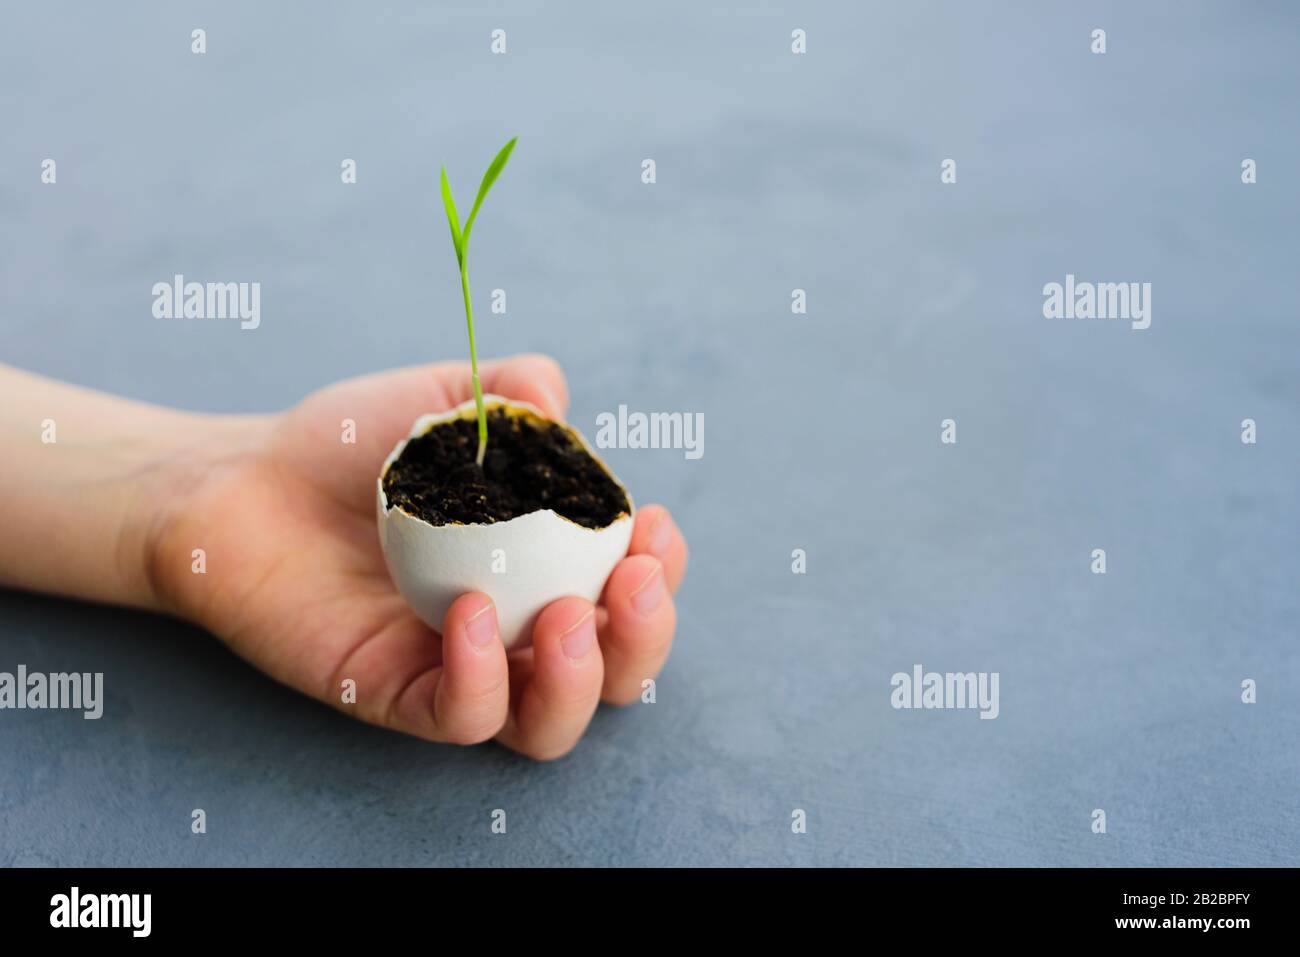 Egg shell with growing sprout in child ands. Spring and Easter concept Stock Photo